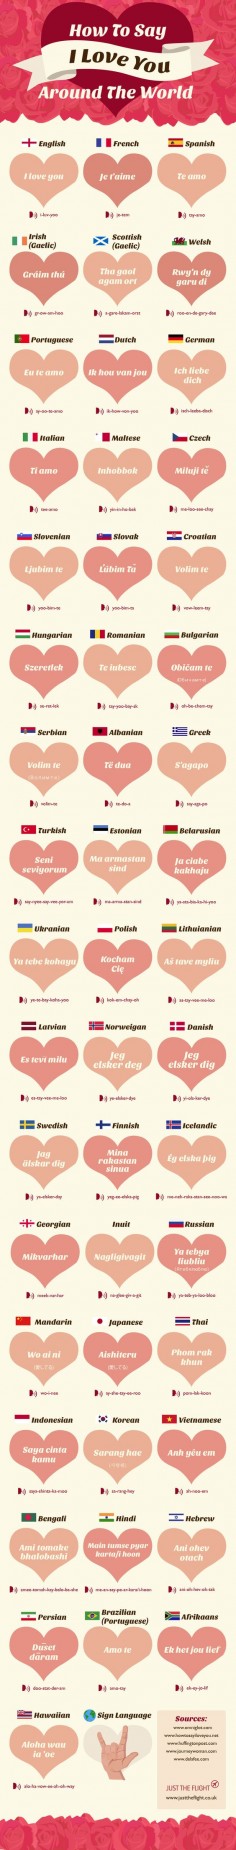 Get Ready For Valentine’s Day: Learn to Say ‘I Love You’ Around The World